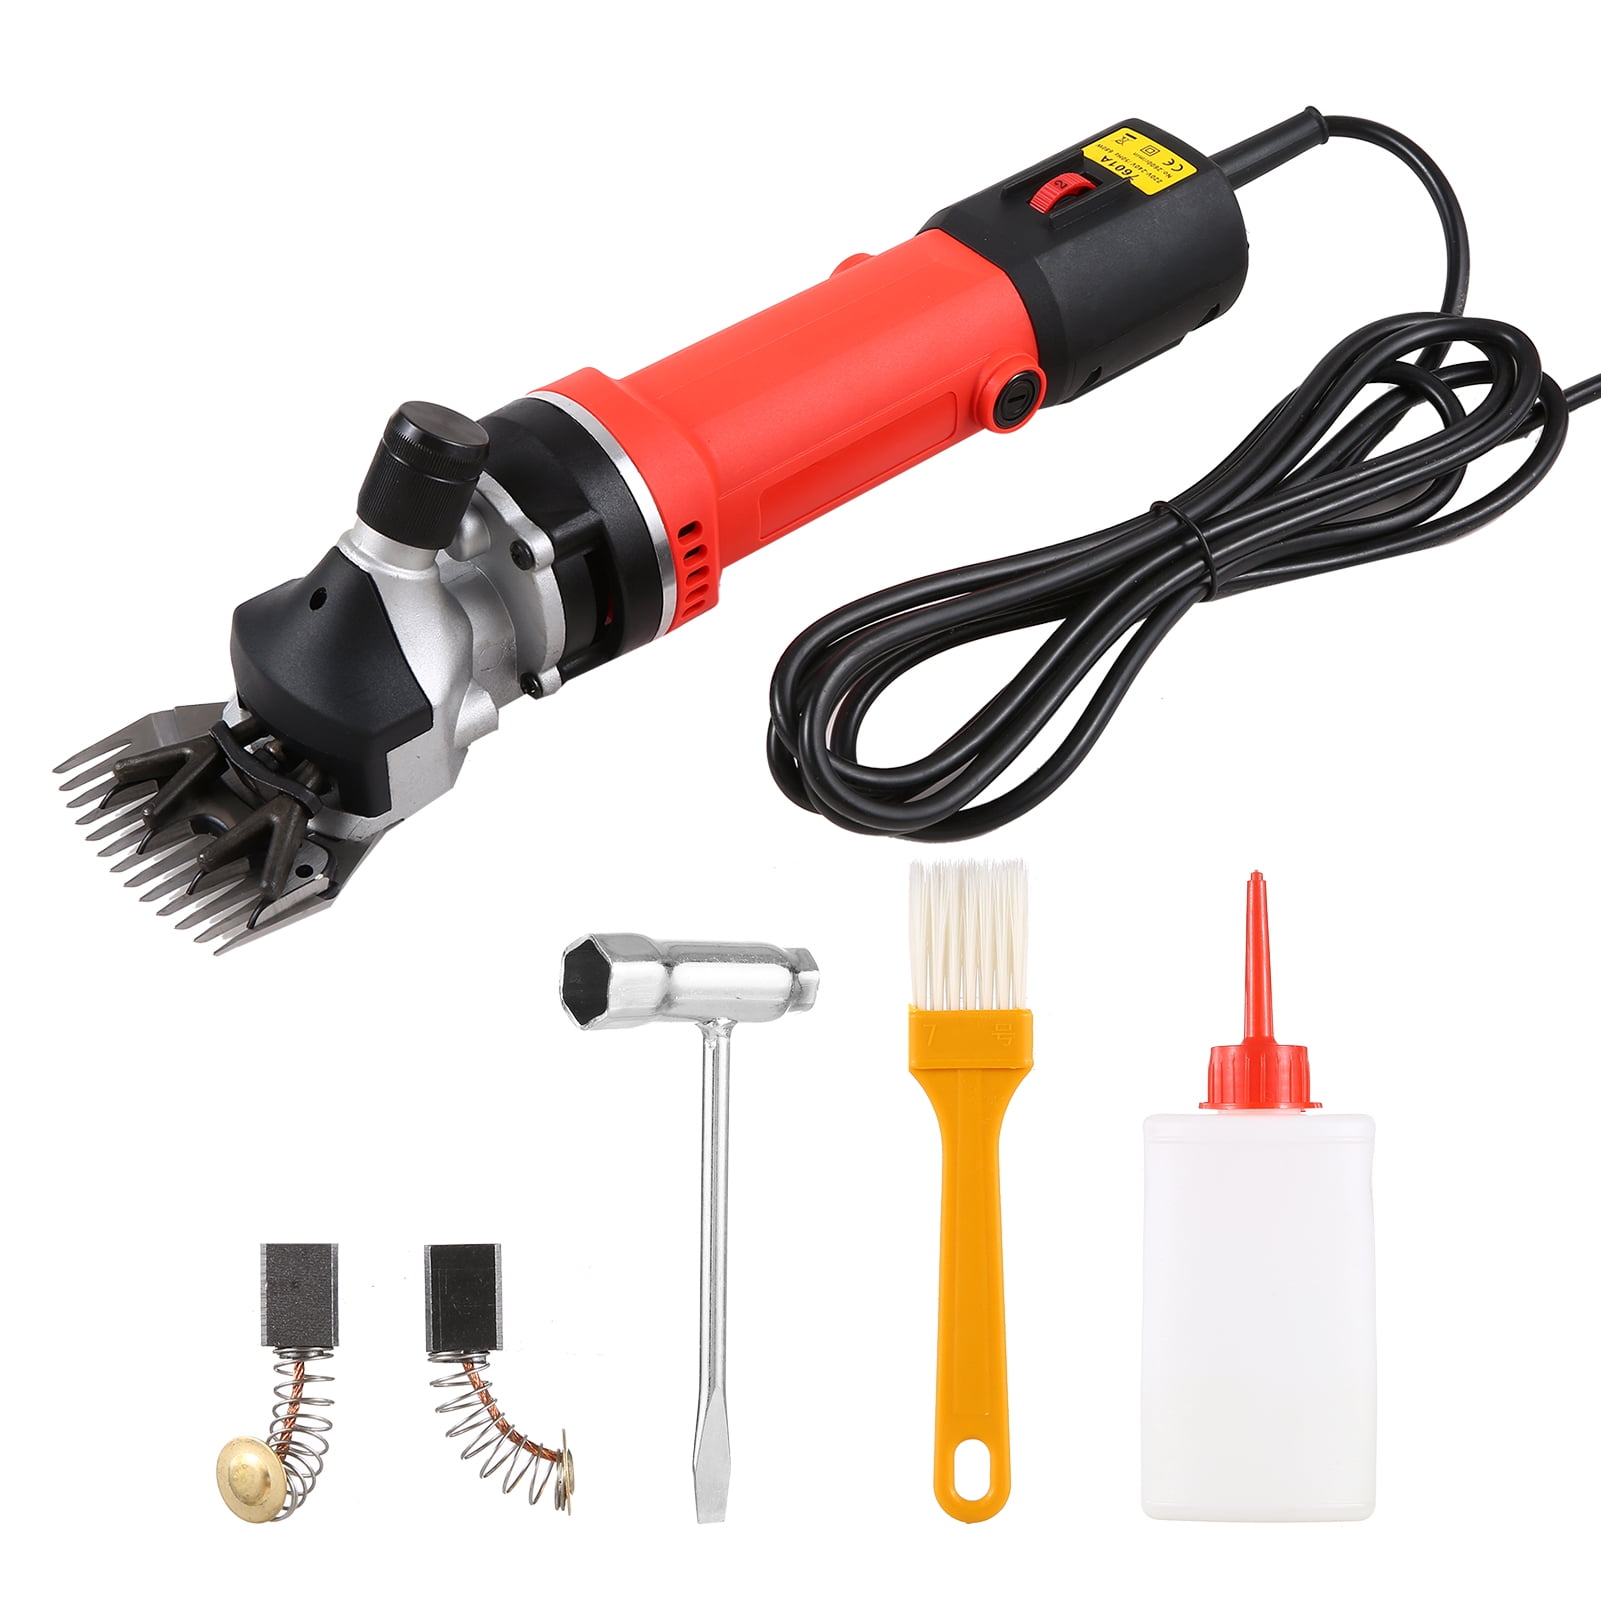 Carevas 680W Electric Sheep Shears and 6-Speed Professional Sheep